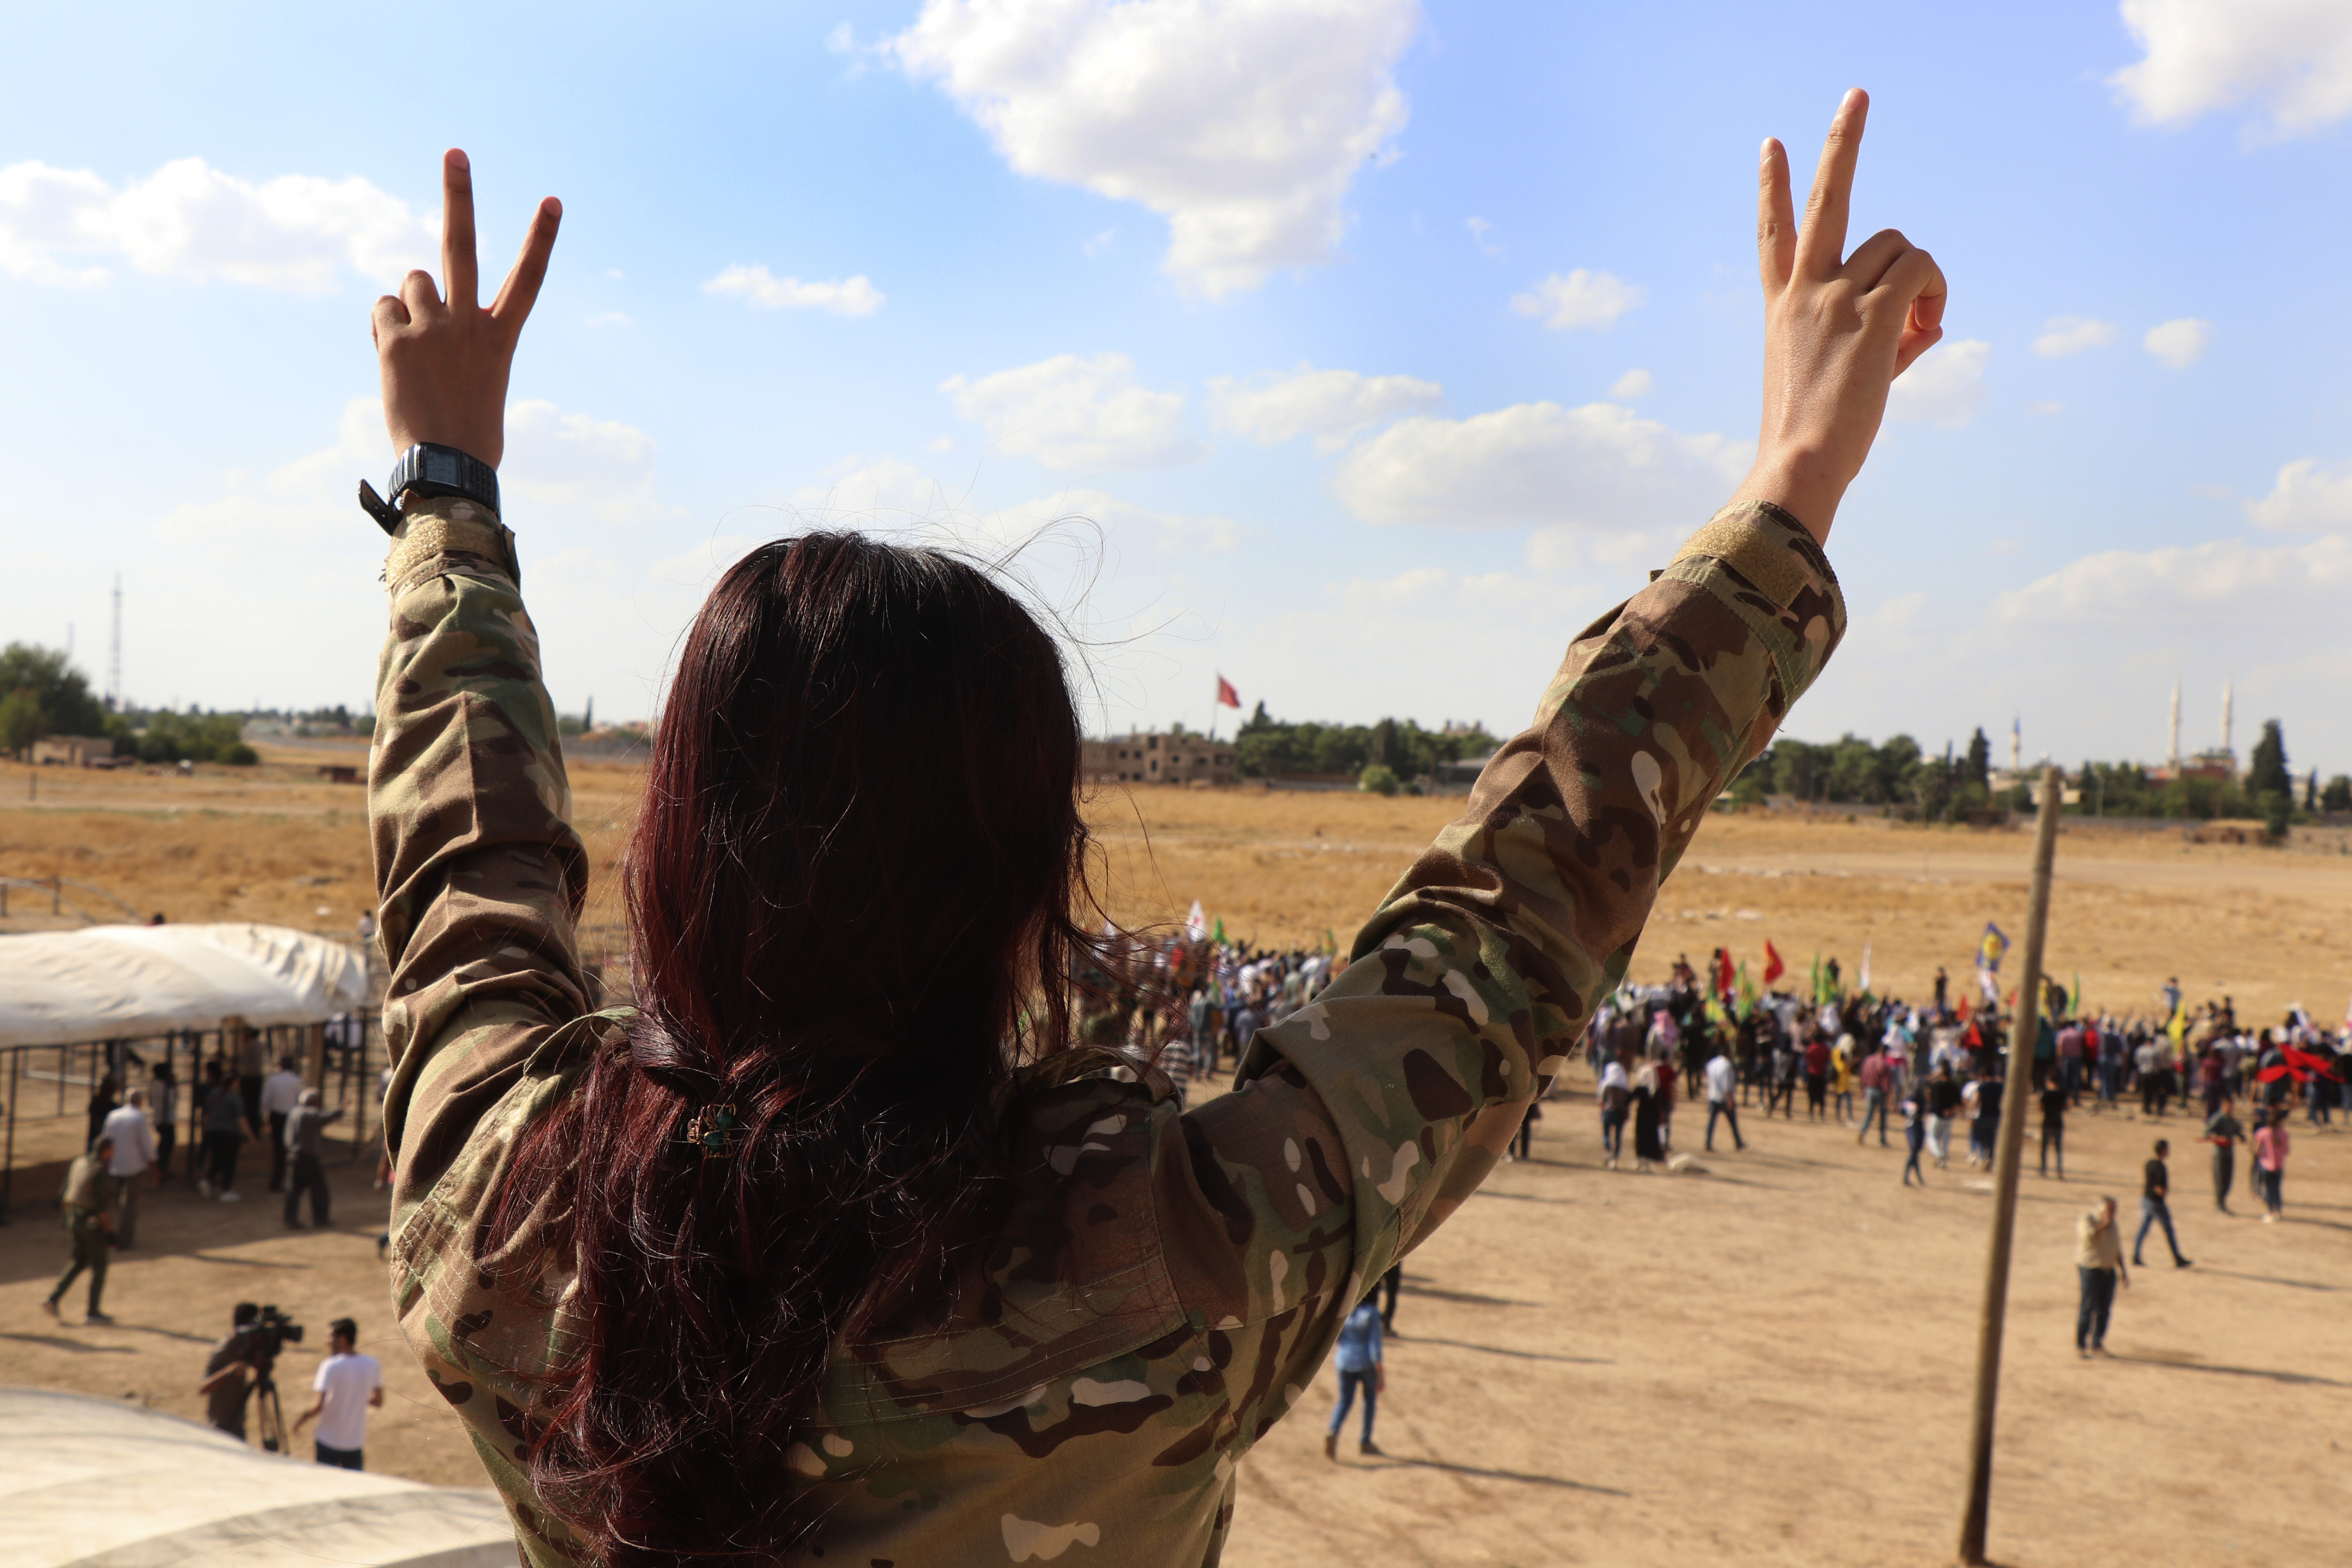 A fighter from the Syrian Democratic Forces, SDF, flashes the victory sign during a demonstration against possible Turkish military operation on their areas, at the Syrian-Turkish border, in Ras al-Ayn, Syria, Monday, Oct. 7, 2019. Syria's Kurds accused the U.S. of turning its back on its allies and risking gains made in the fight against the Islamic State group as American troops began pulling back on Monday from positions in northeastern Syria ahead of an expected Turkish assault. (AP Photo)